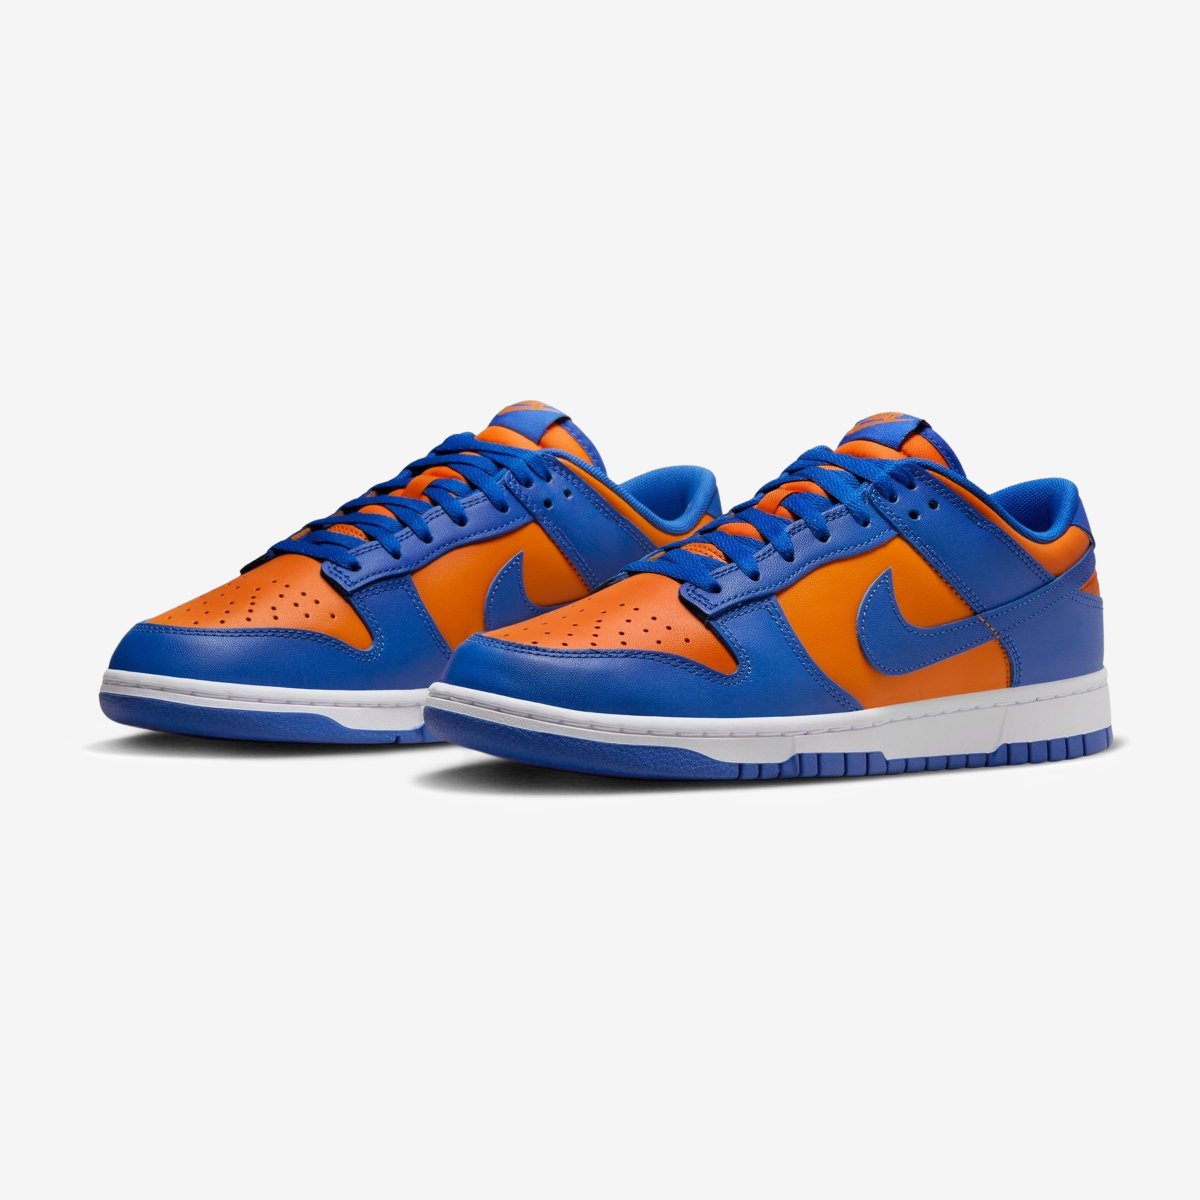 Nike Dunk Low Retro 'Bright Ceramic and Team Royal' // Available Wednesday, 5/8 at 11am at UNDEFEATED La Brea, Glendale, SF, Las Vegas, Phoenix, New York and 7am PST at Undefeated.com @nike